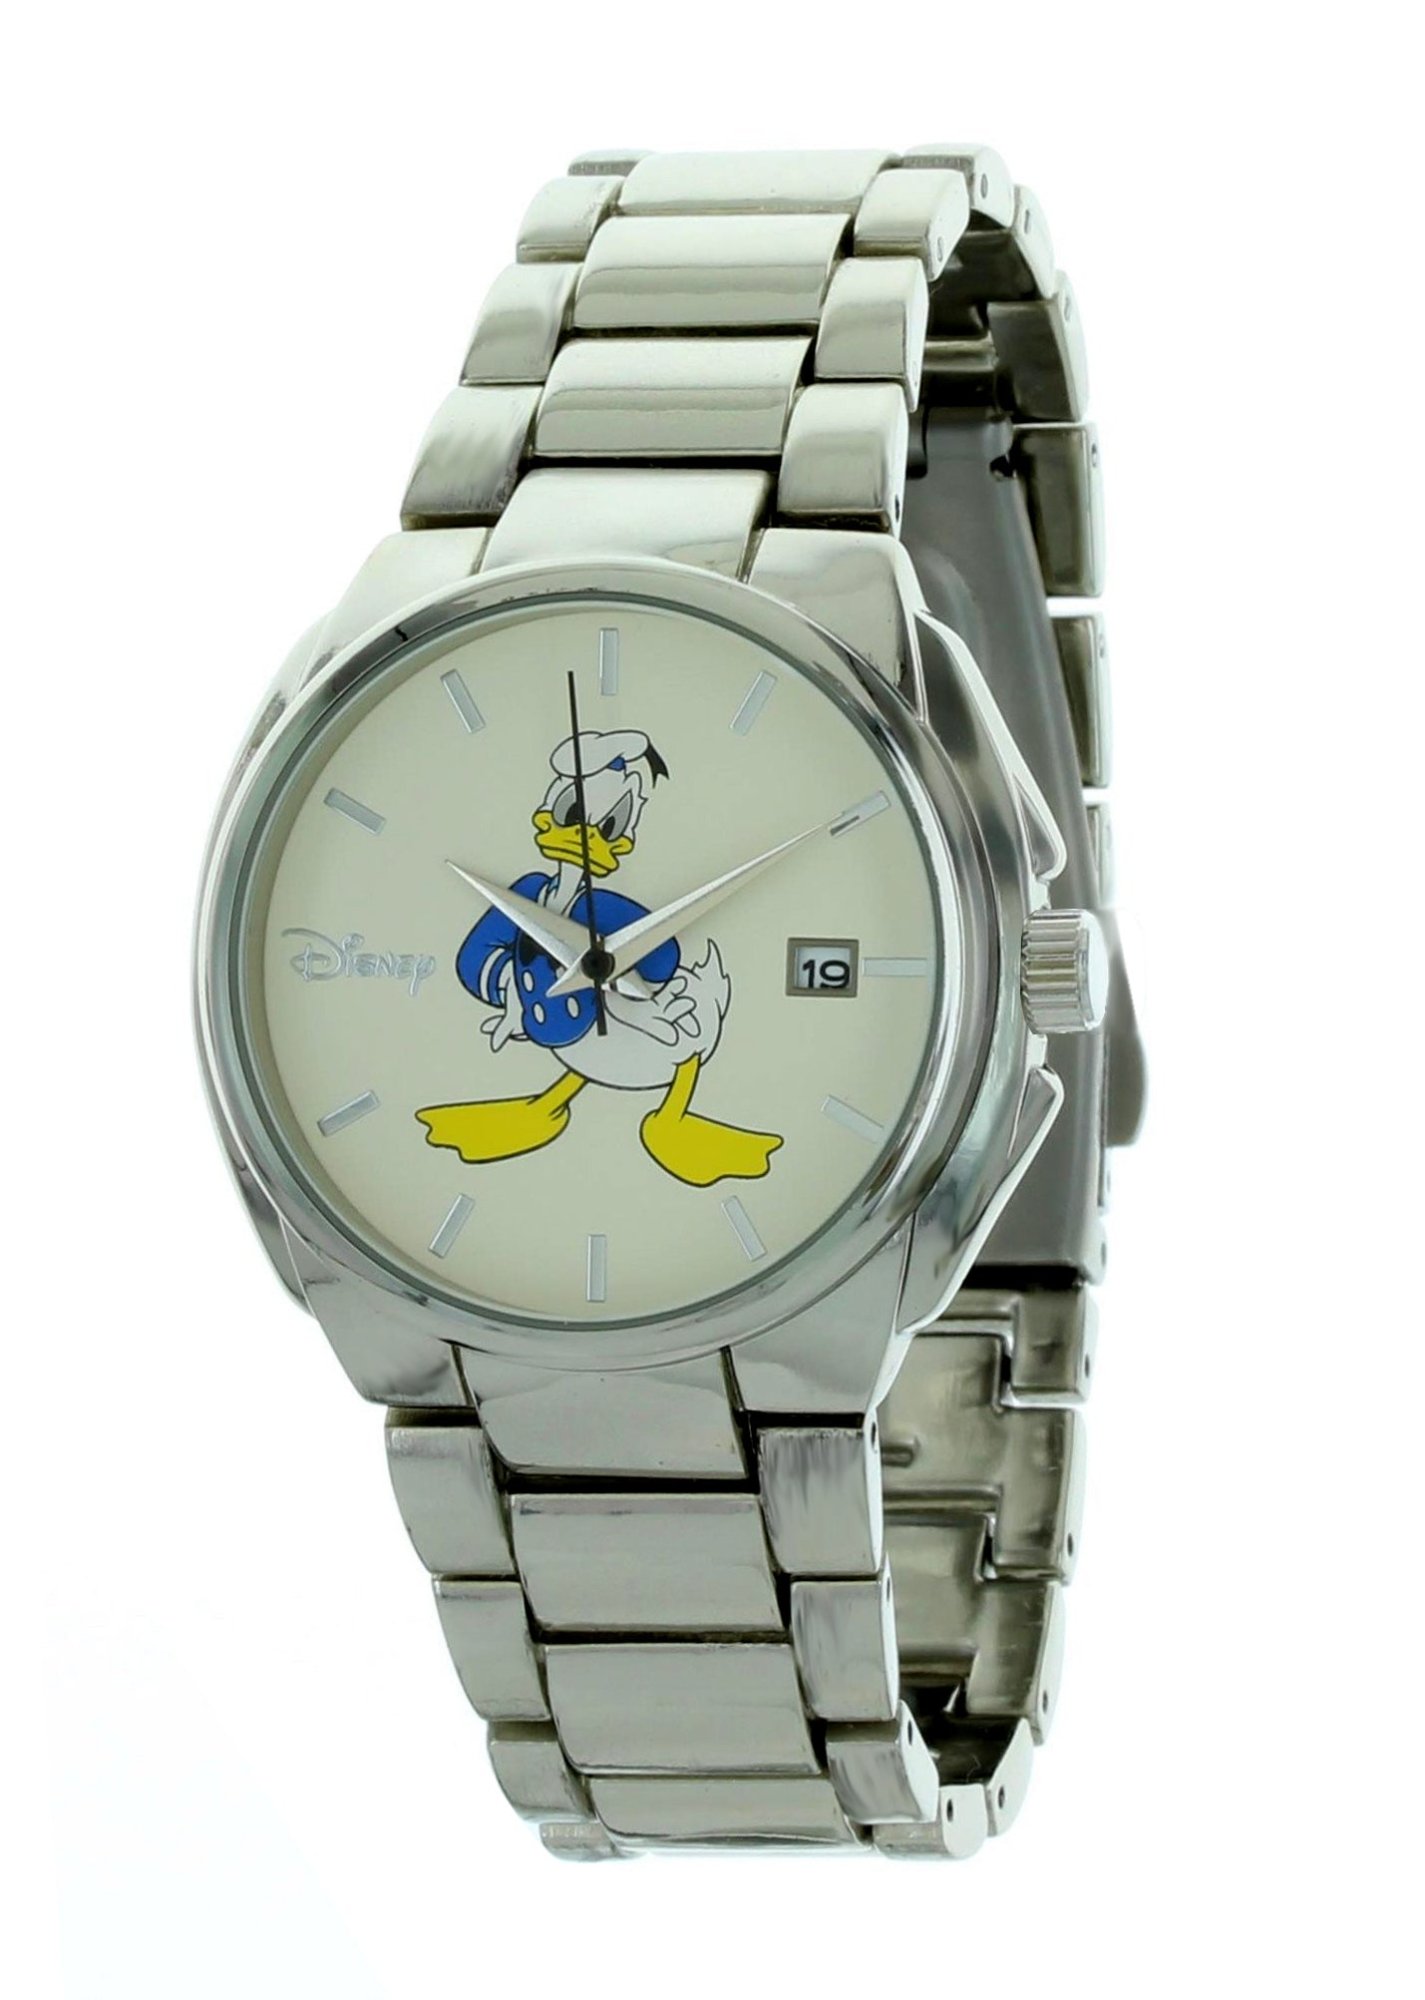 Model: Disney Donald Duck Men's Watch with Date and Silver Tone Metal Band